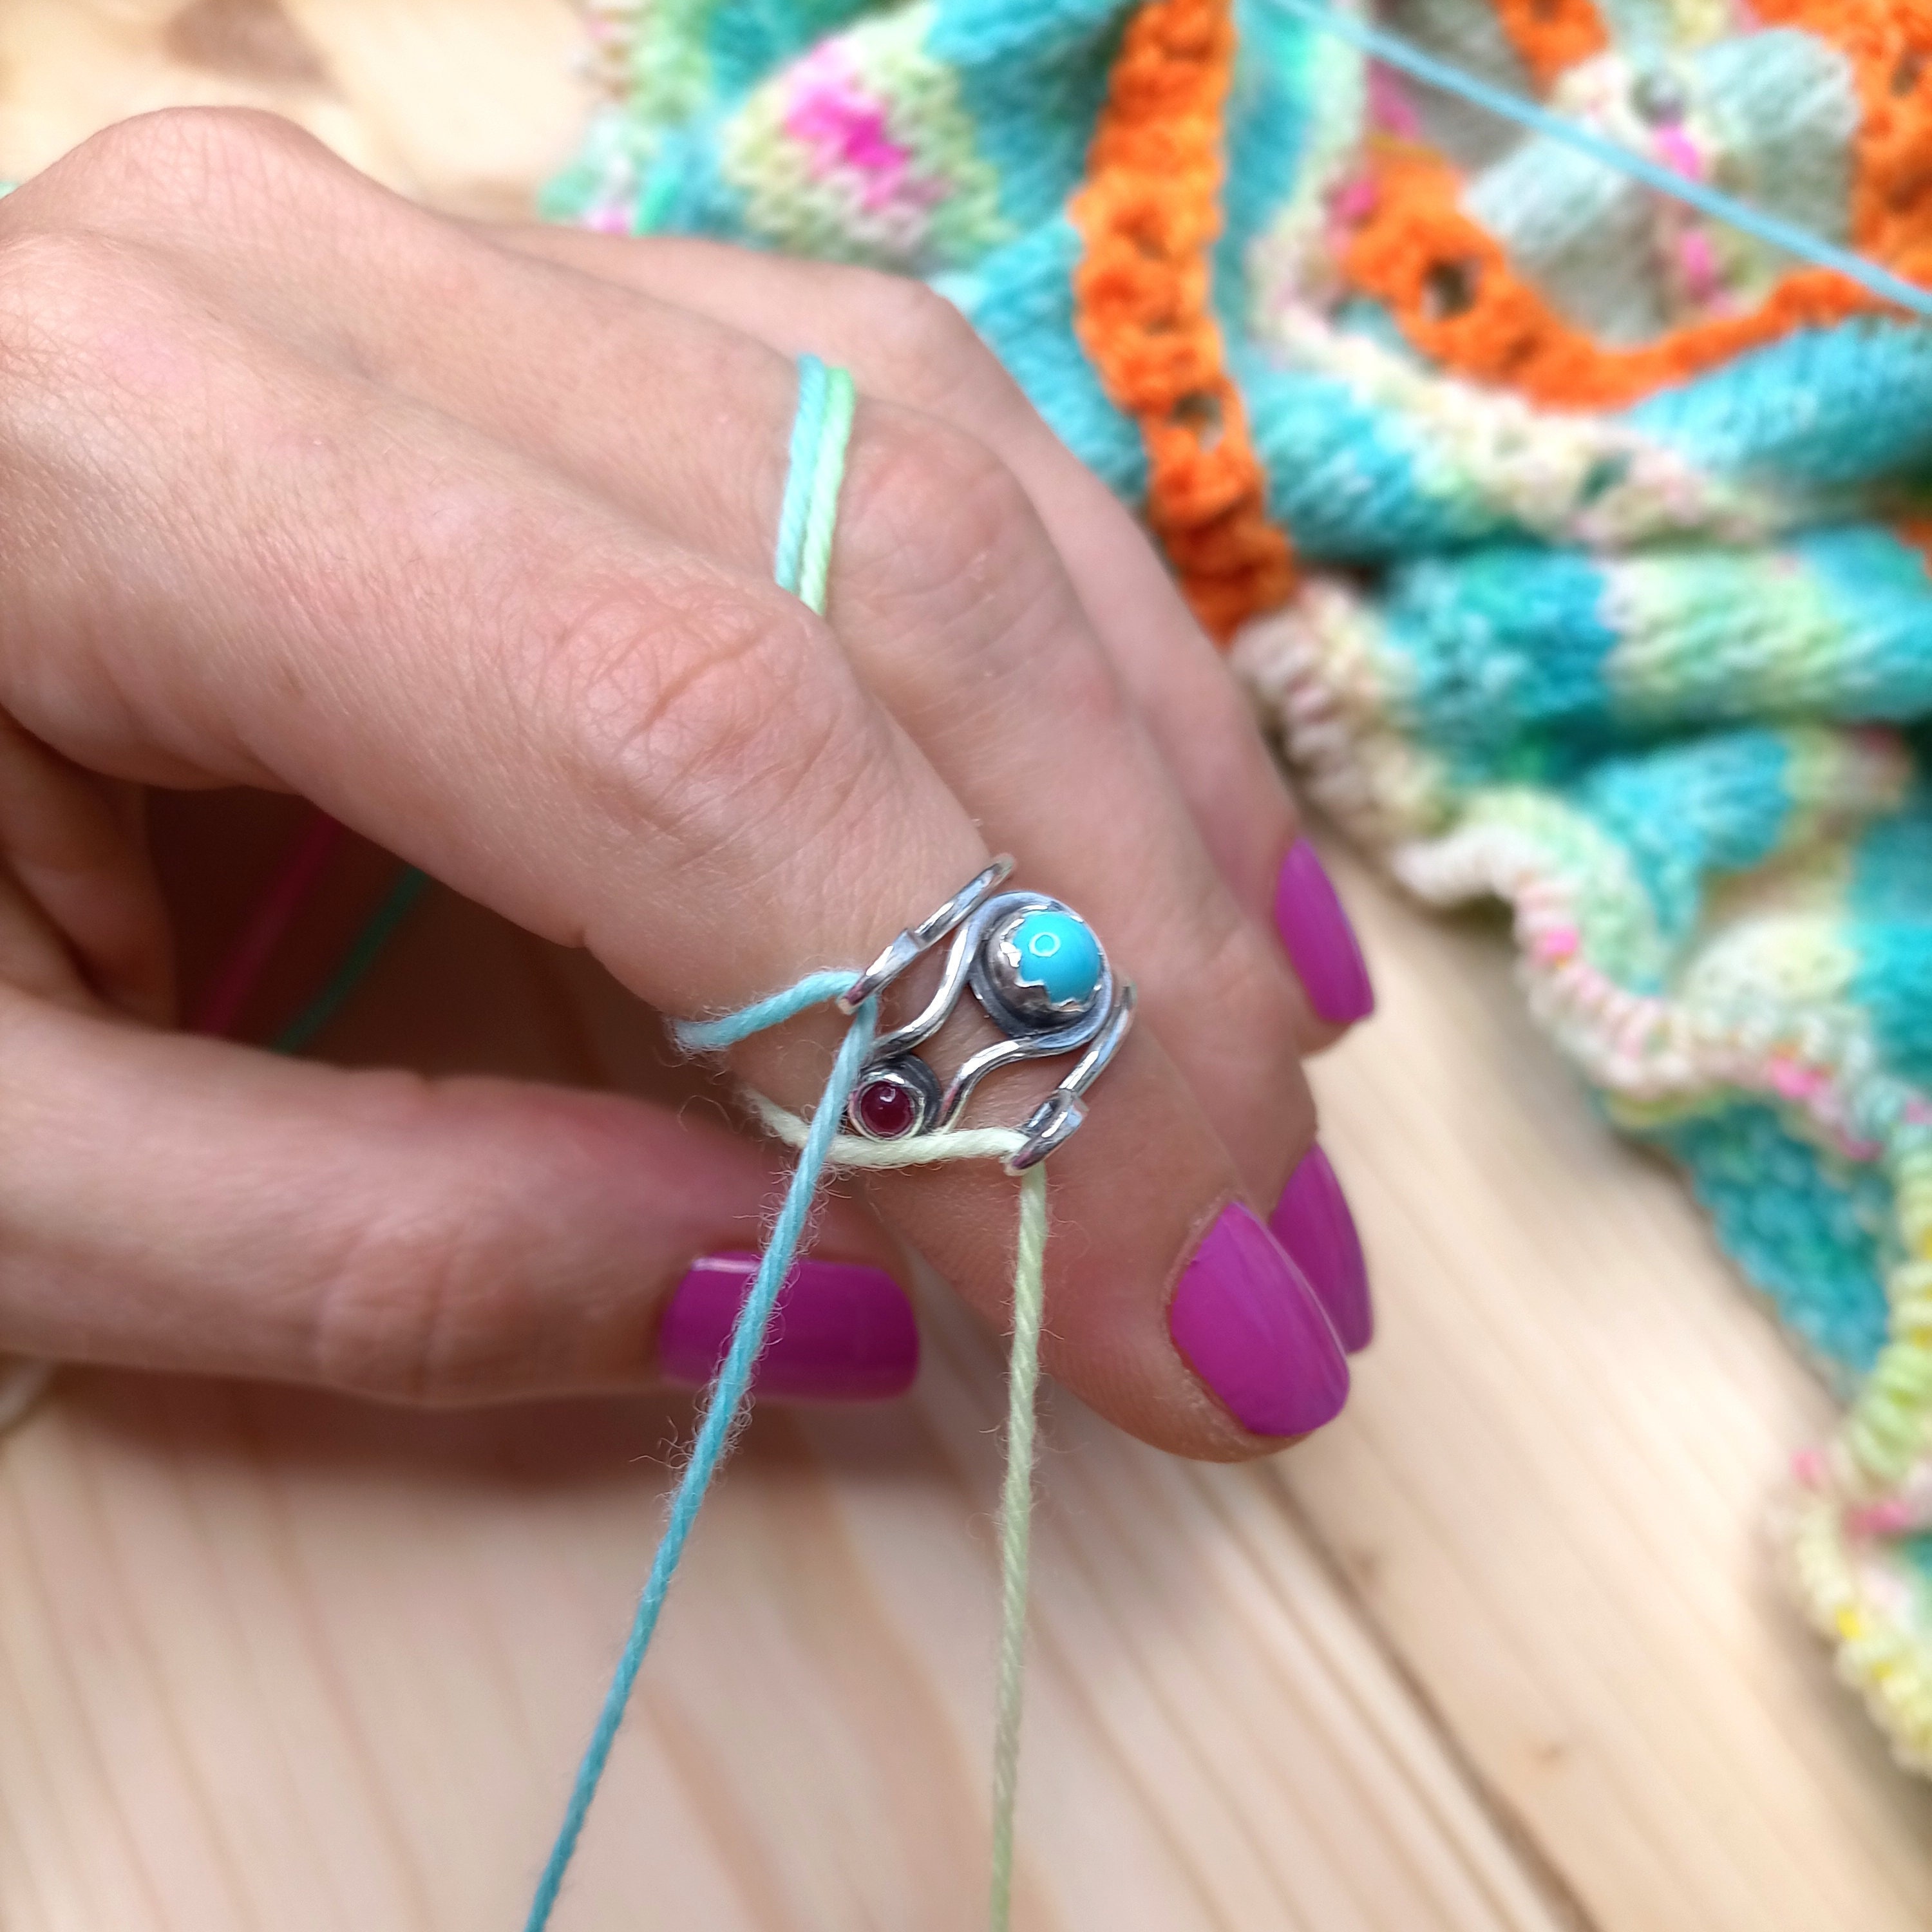 Yarn Guide Ring - Turquoise and Garnet Sterling Silver Tension Ring for Knitting or Crochet